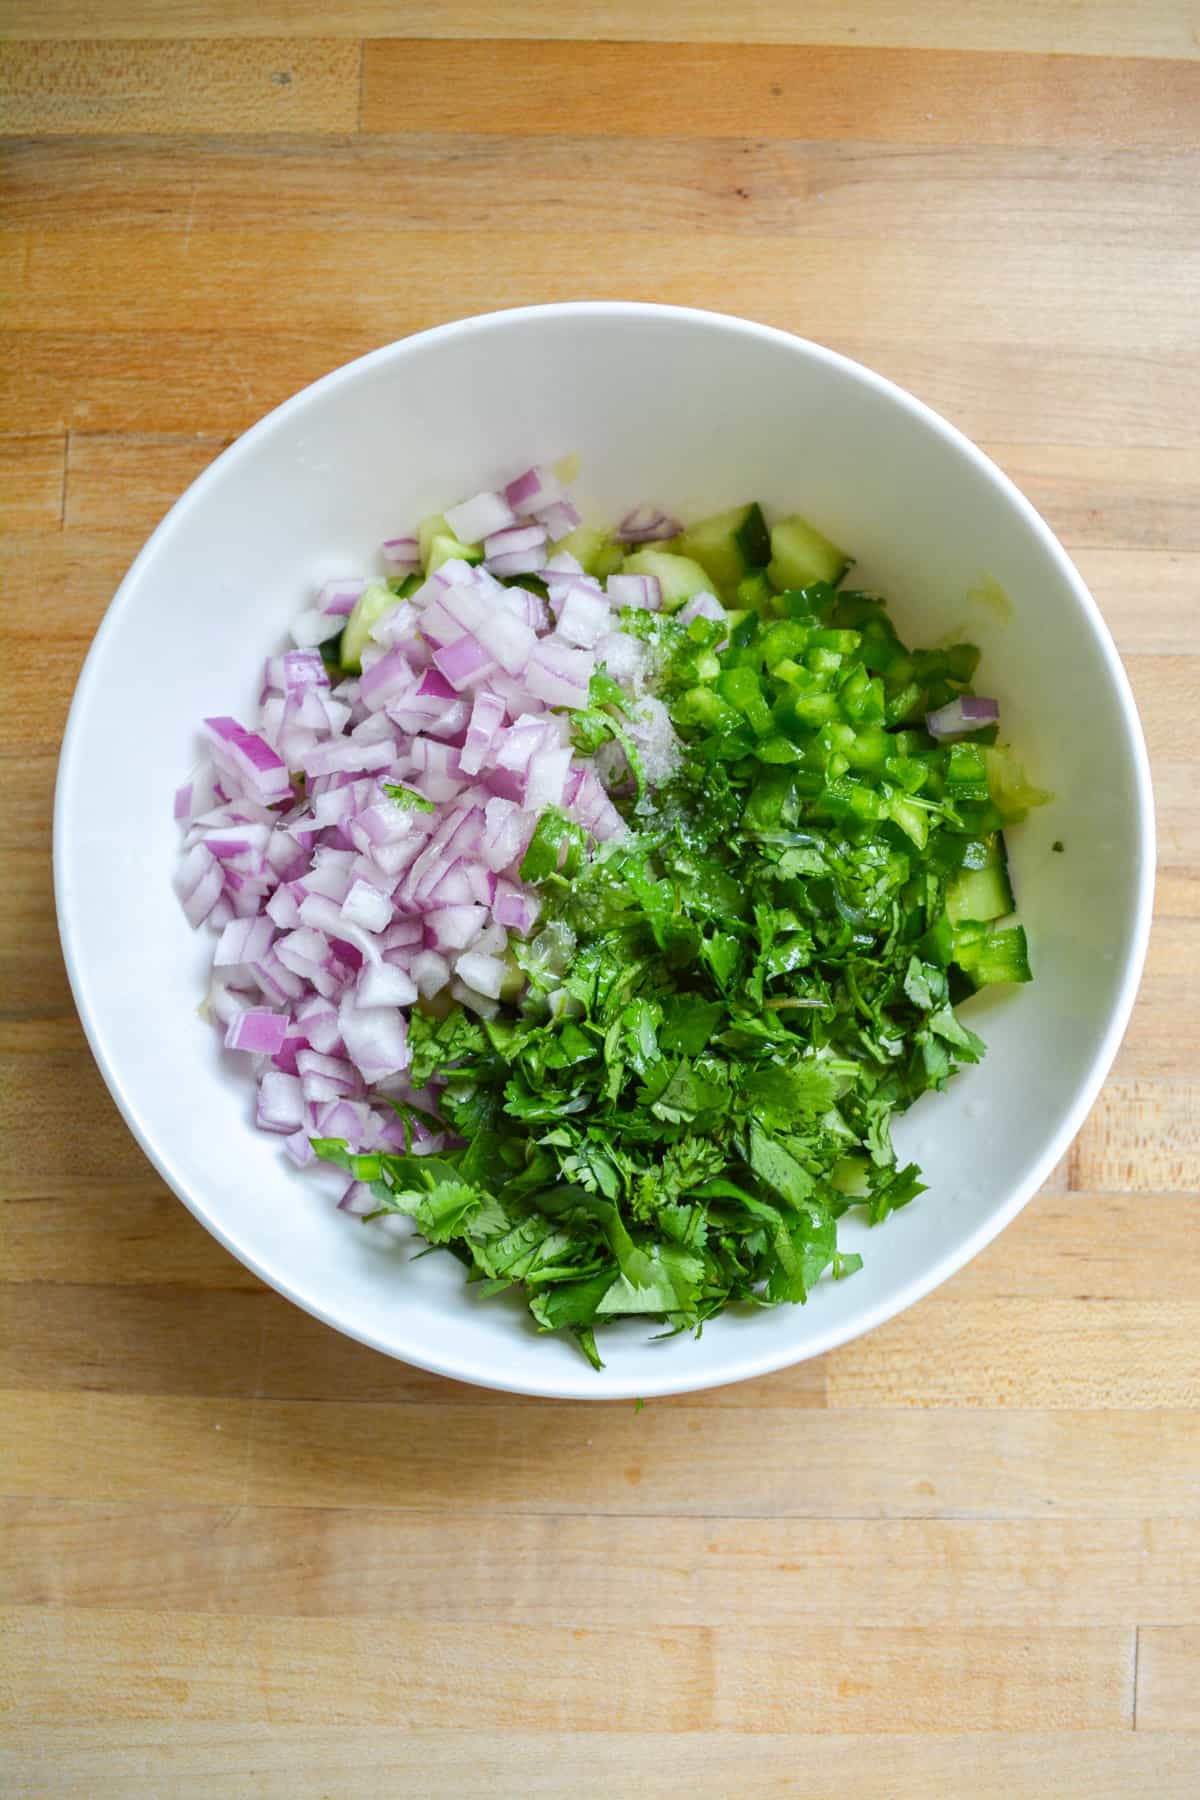 The cucumber pico de gallo ingredients in a bowl.